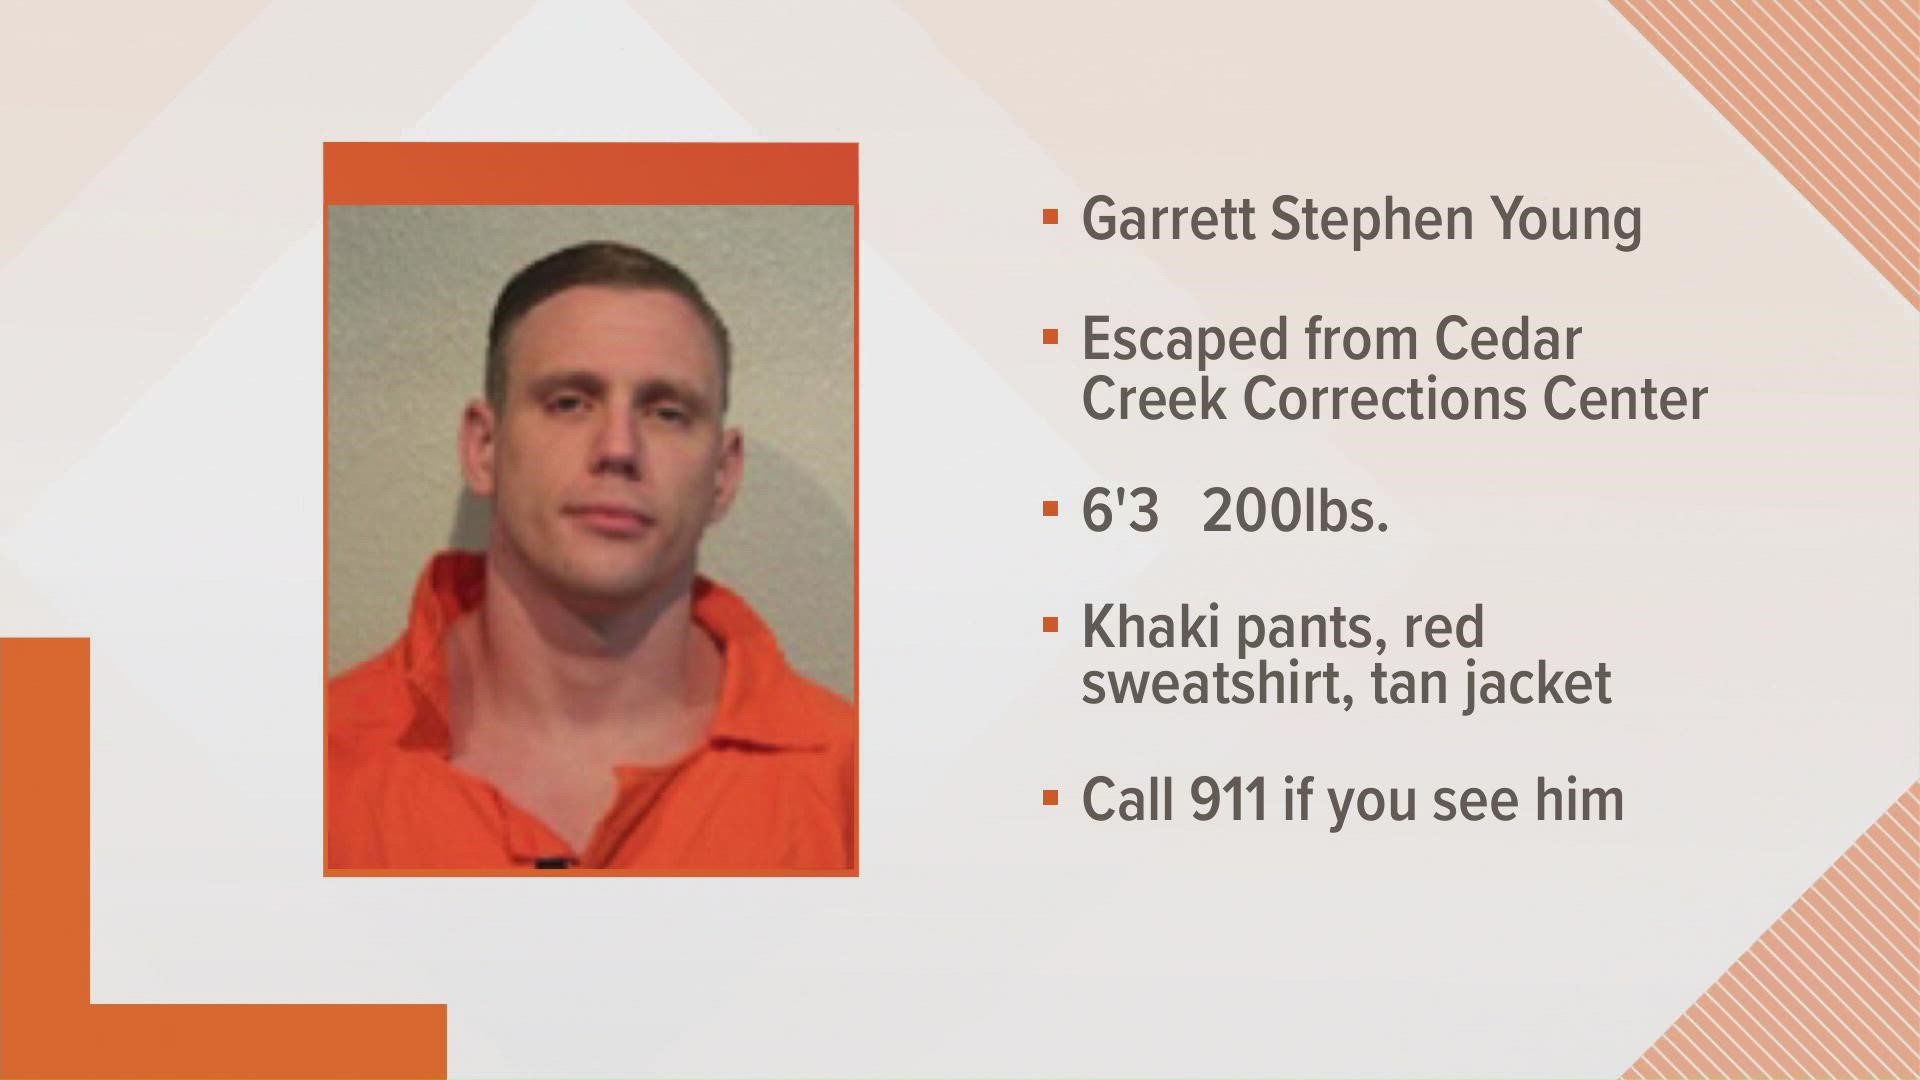 Garrett Stephen Young was discovered missing around 3 a.m. Saturday during a routine check, according to the Department of Corrections.